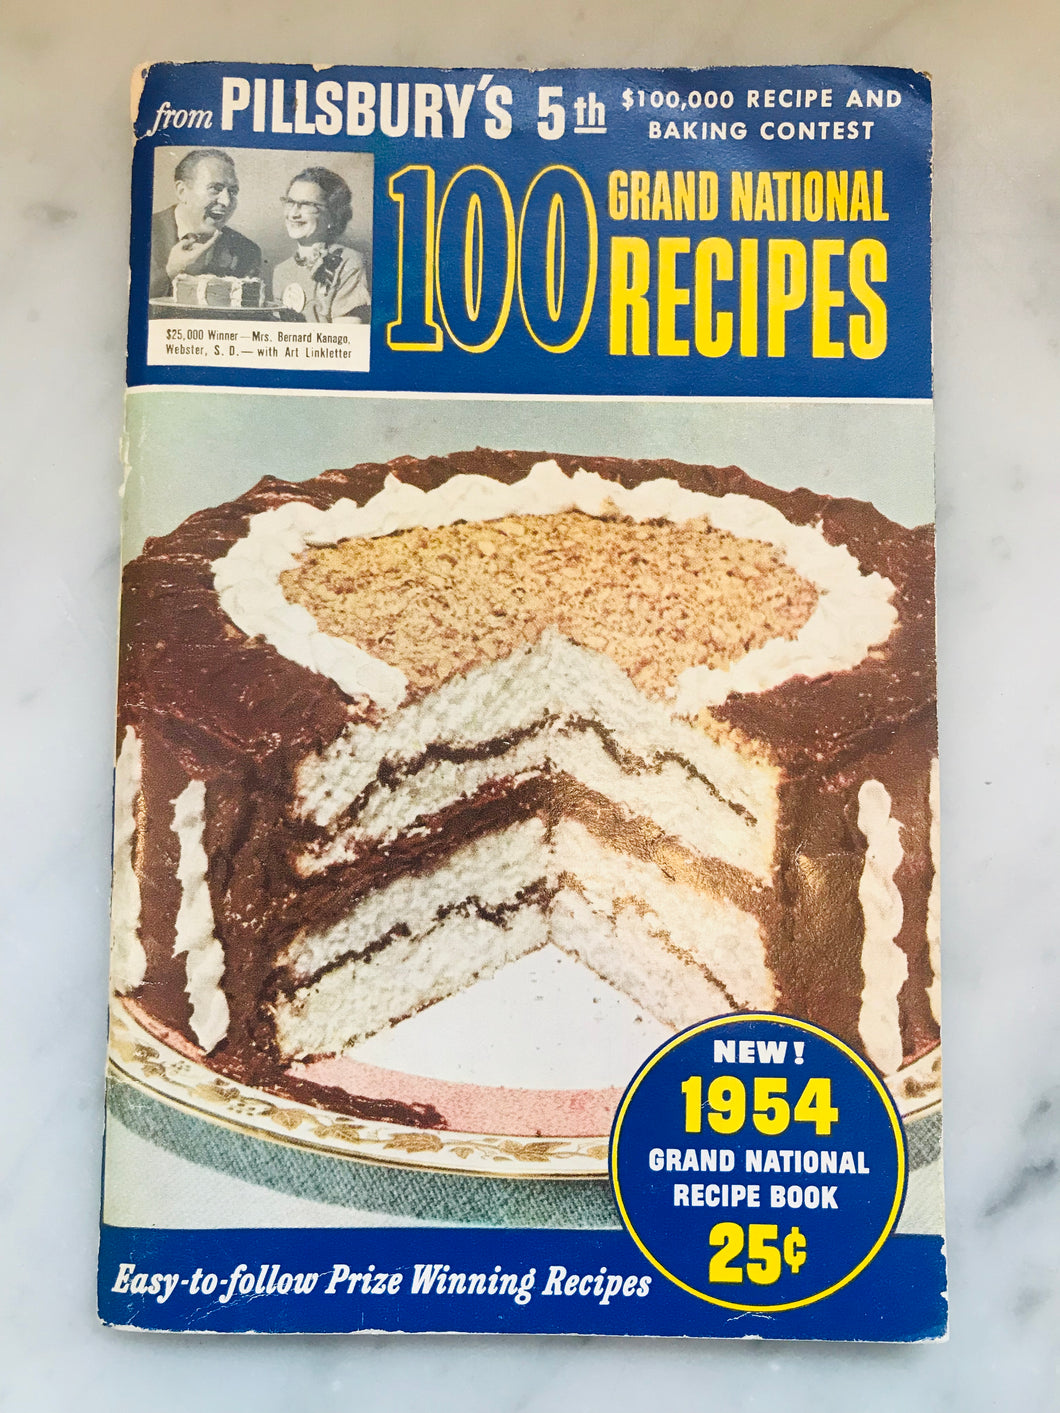 From Pillsbury's 5th Grand National $100,000 Recipe and Baking Contest, 100 Prize Winning Recipes